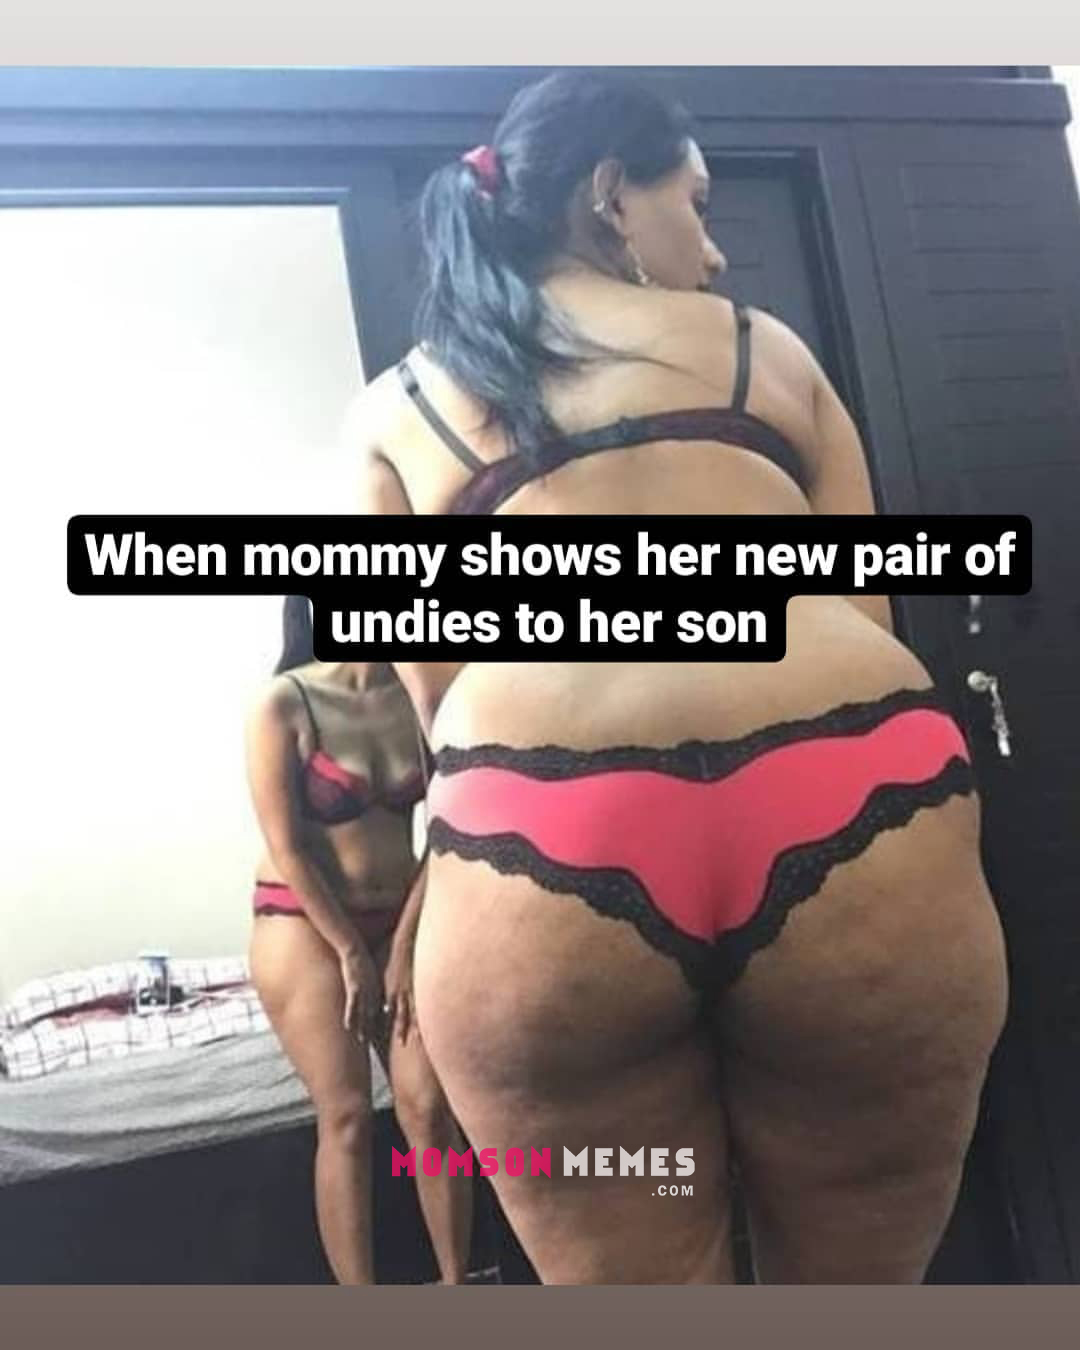 Bikini Incest Mother Captions Porn - Which i gifted her! - Incest Mom Son Captions Memes